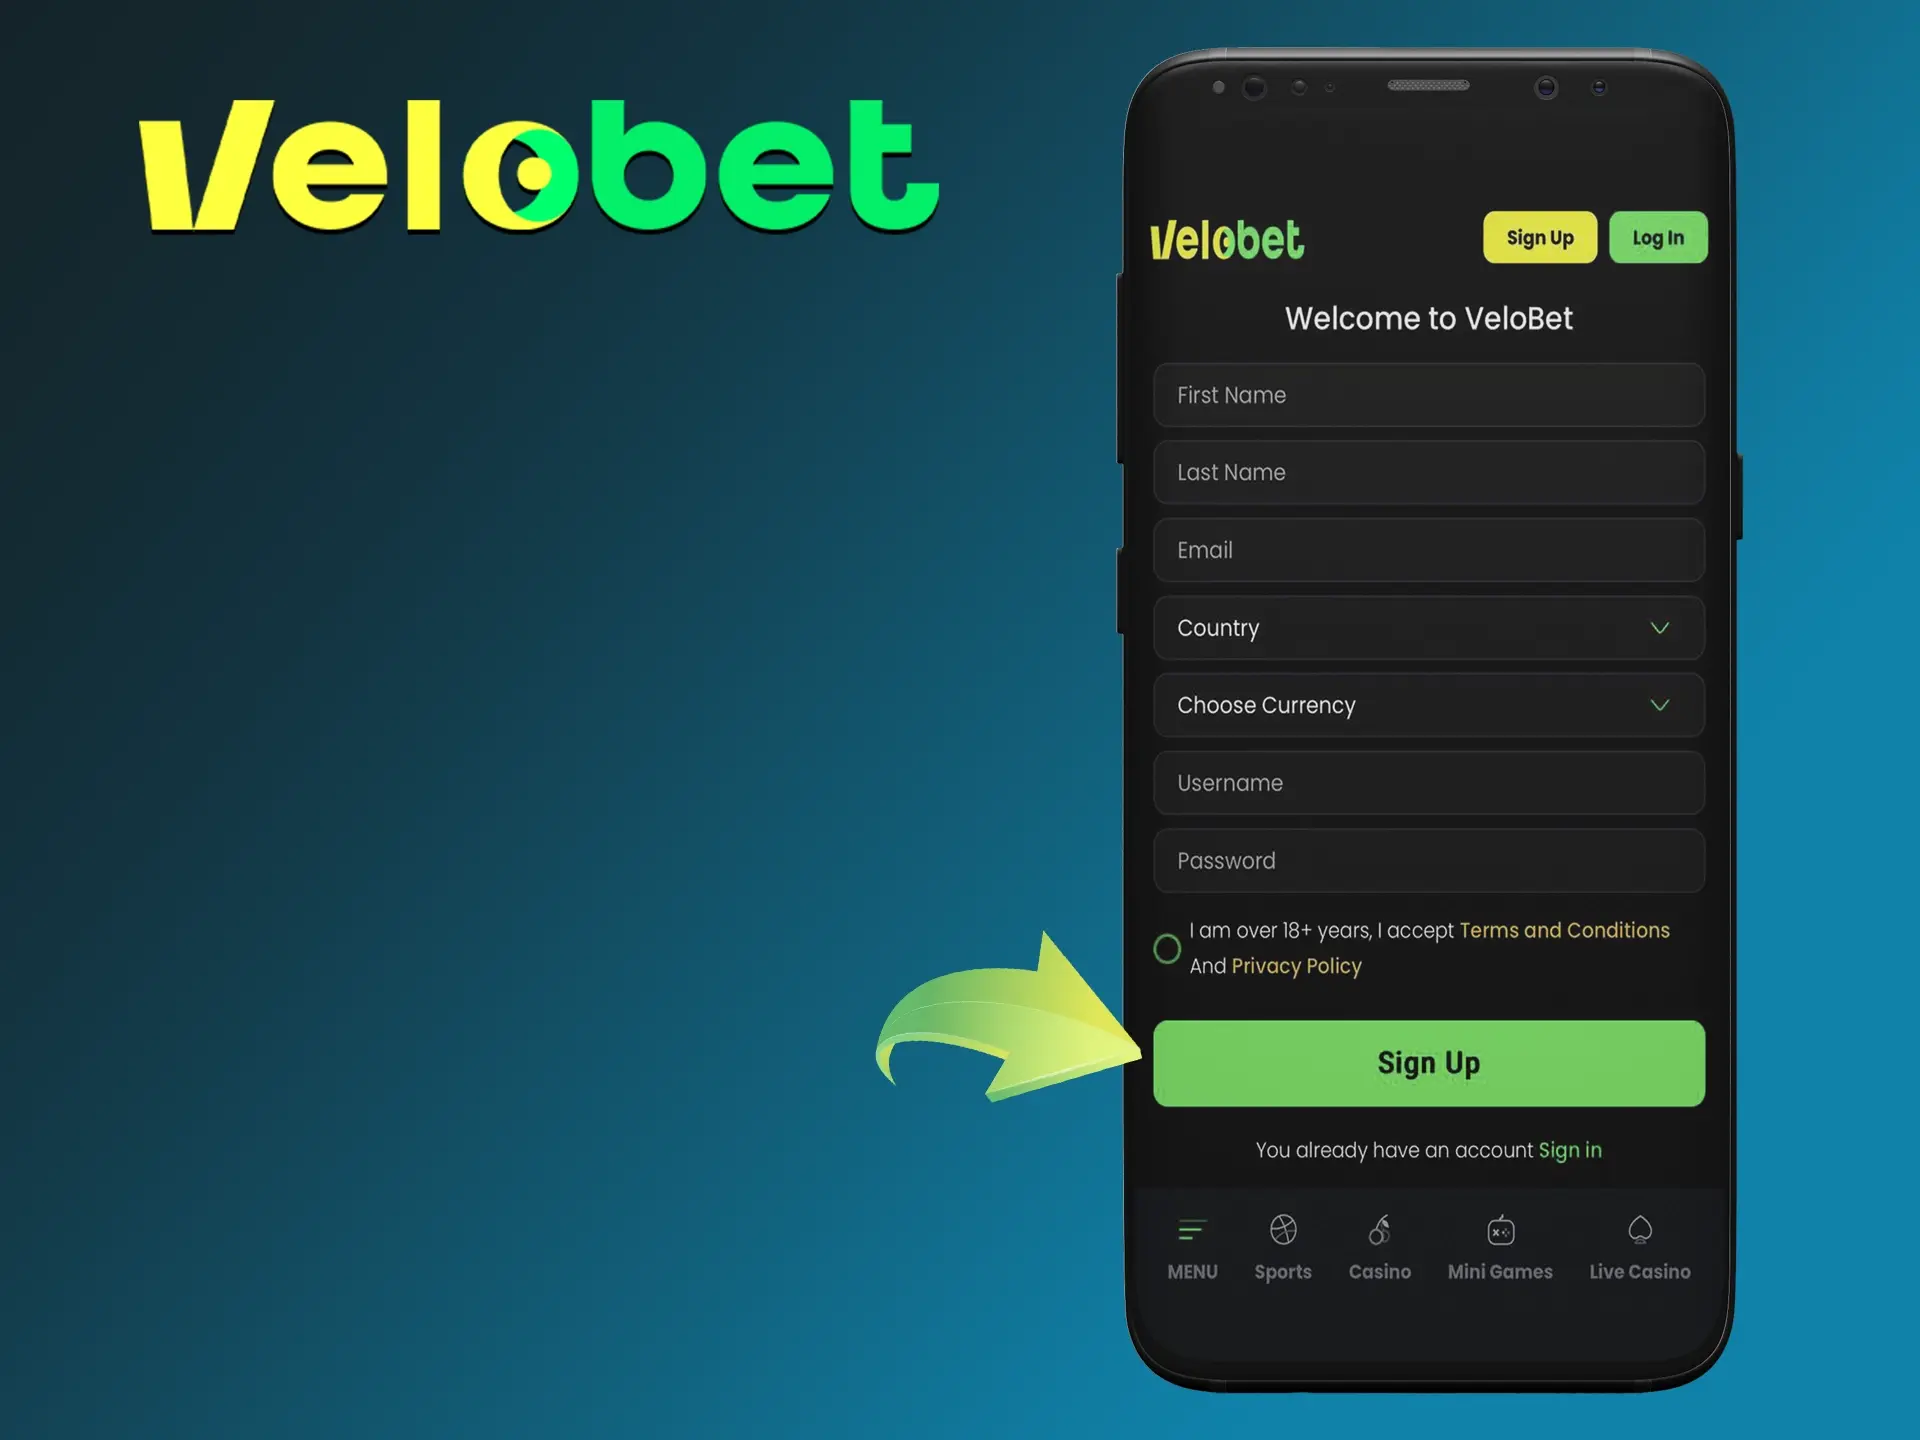 Start betting at Velobet by completing a simple and straightforward registration.